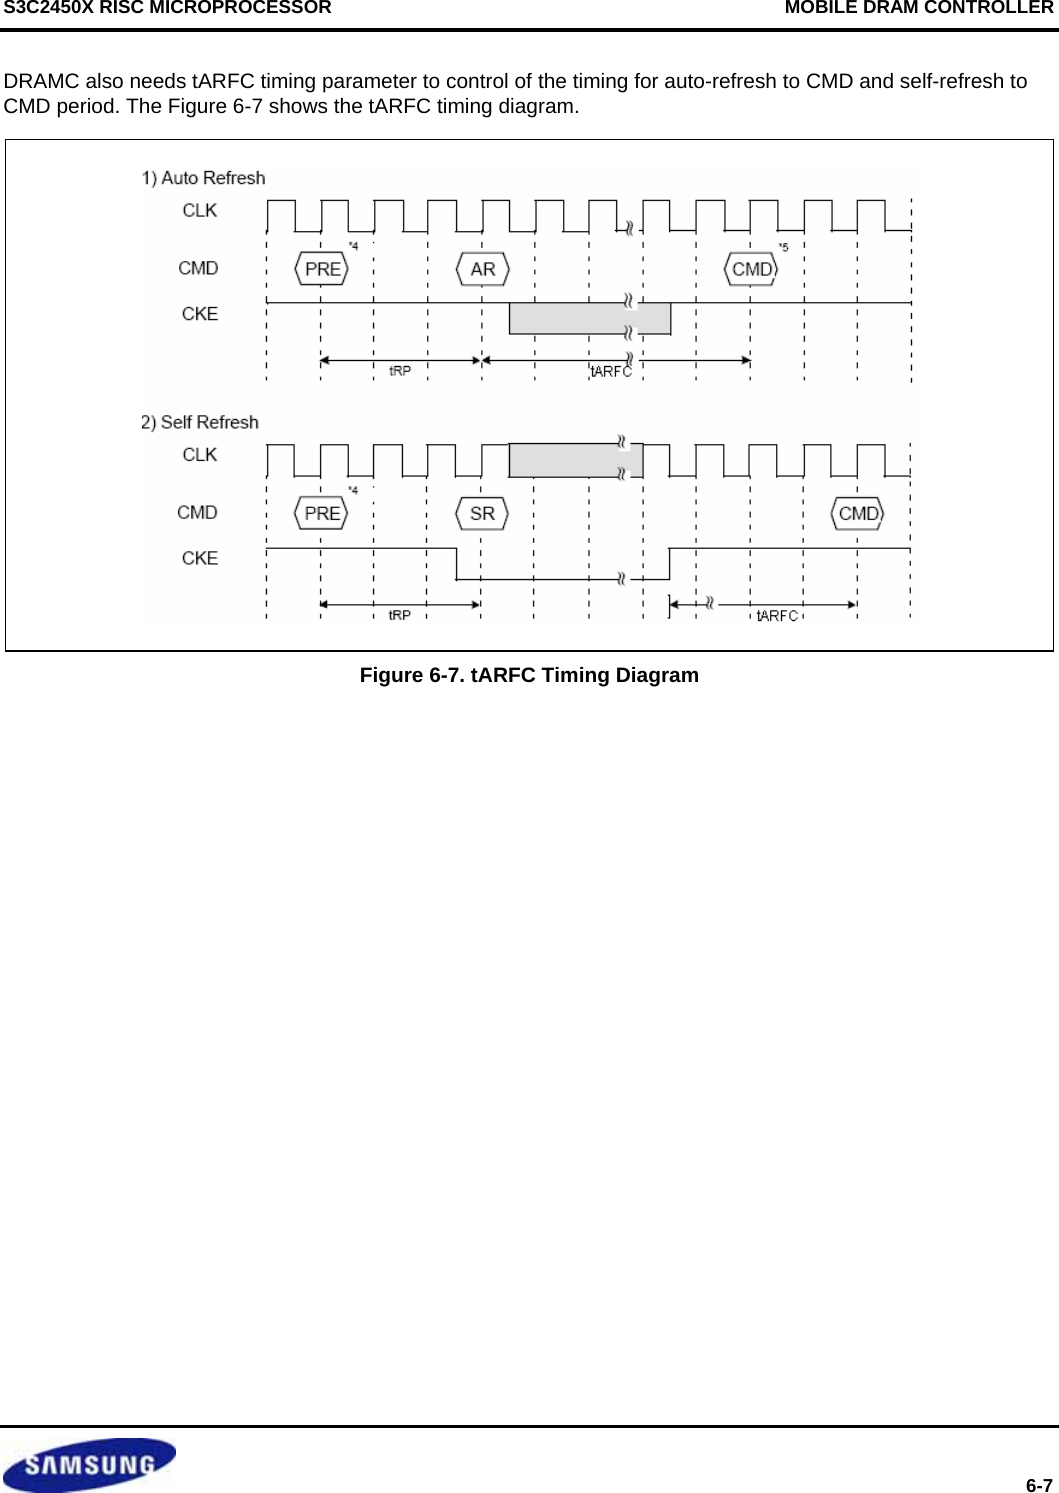 S3C2450X RISC MICROPROCESSOR                                                MOBILE DRAM CONTROLLER  6-7 DRAMC also needs tARFC timing parameter to control of the timing for auto-refresh to CMD and self-refresh to CMD period. The Figure 6-7 shows the tARFC timing diagram.    Figure 6-7. tARFC Timing Diagram   